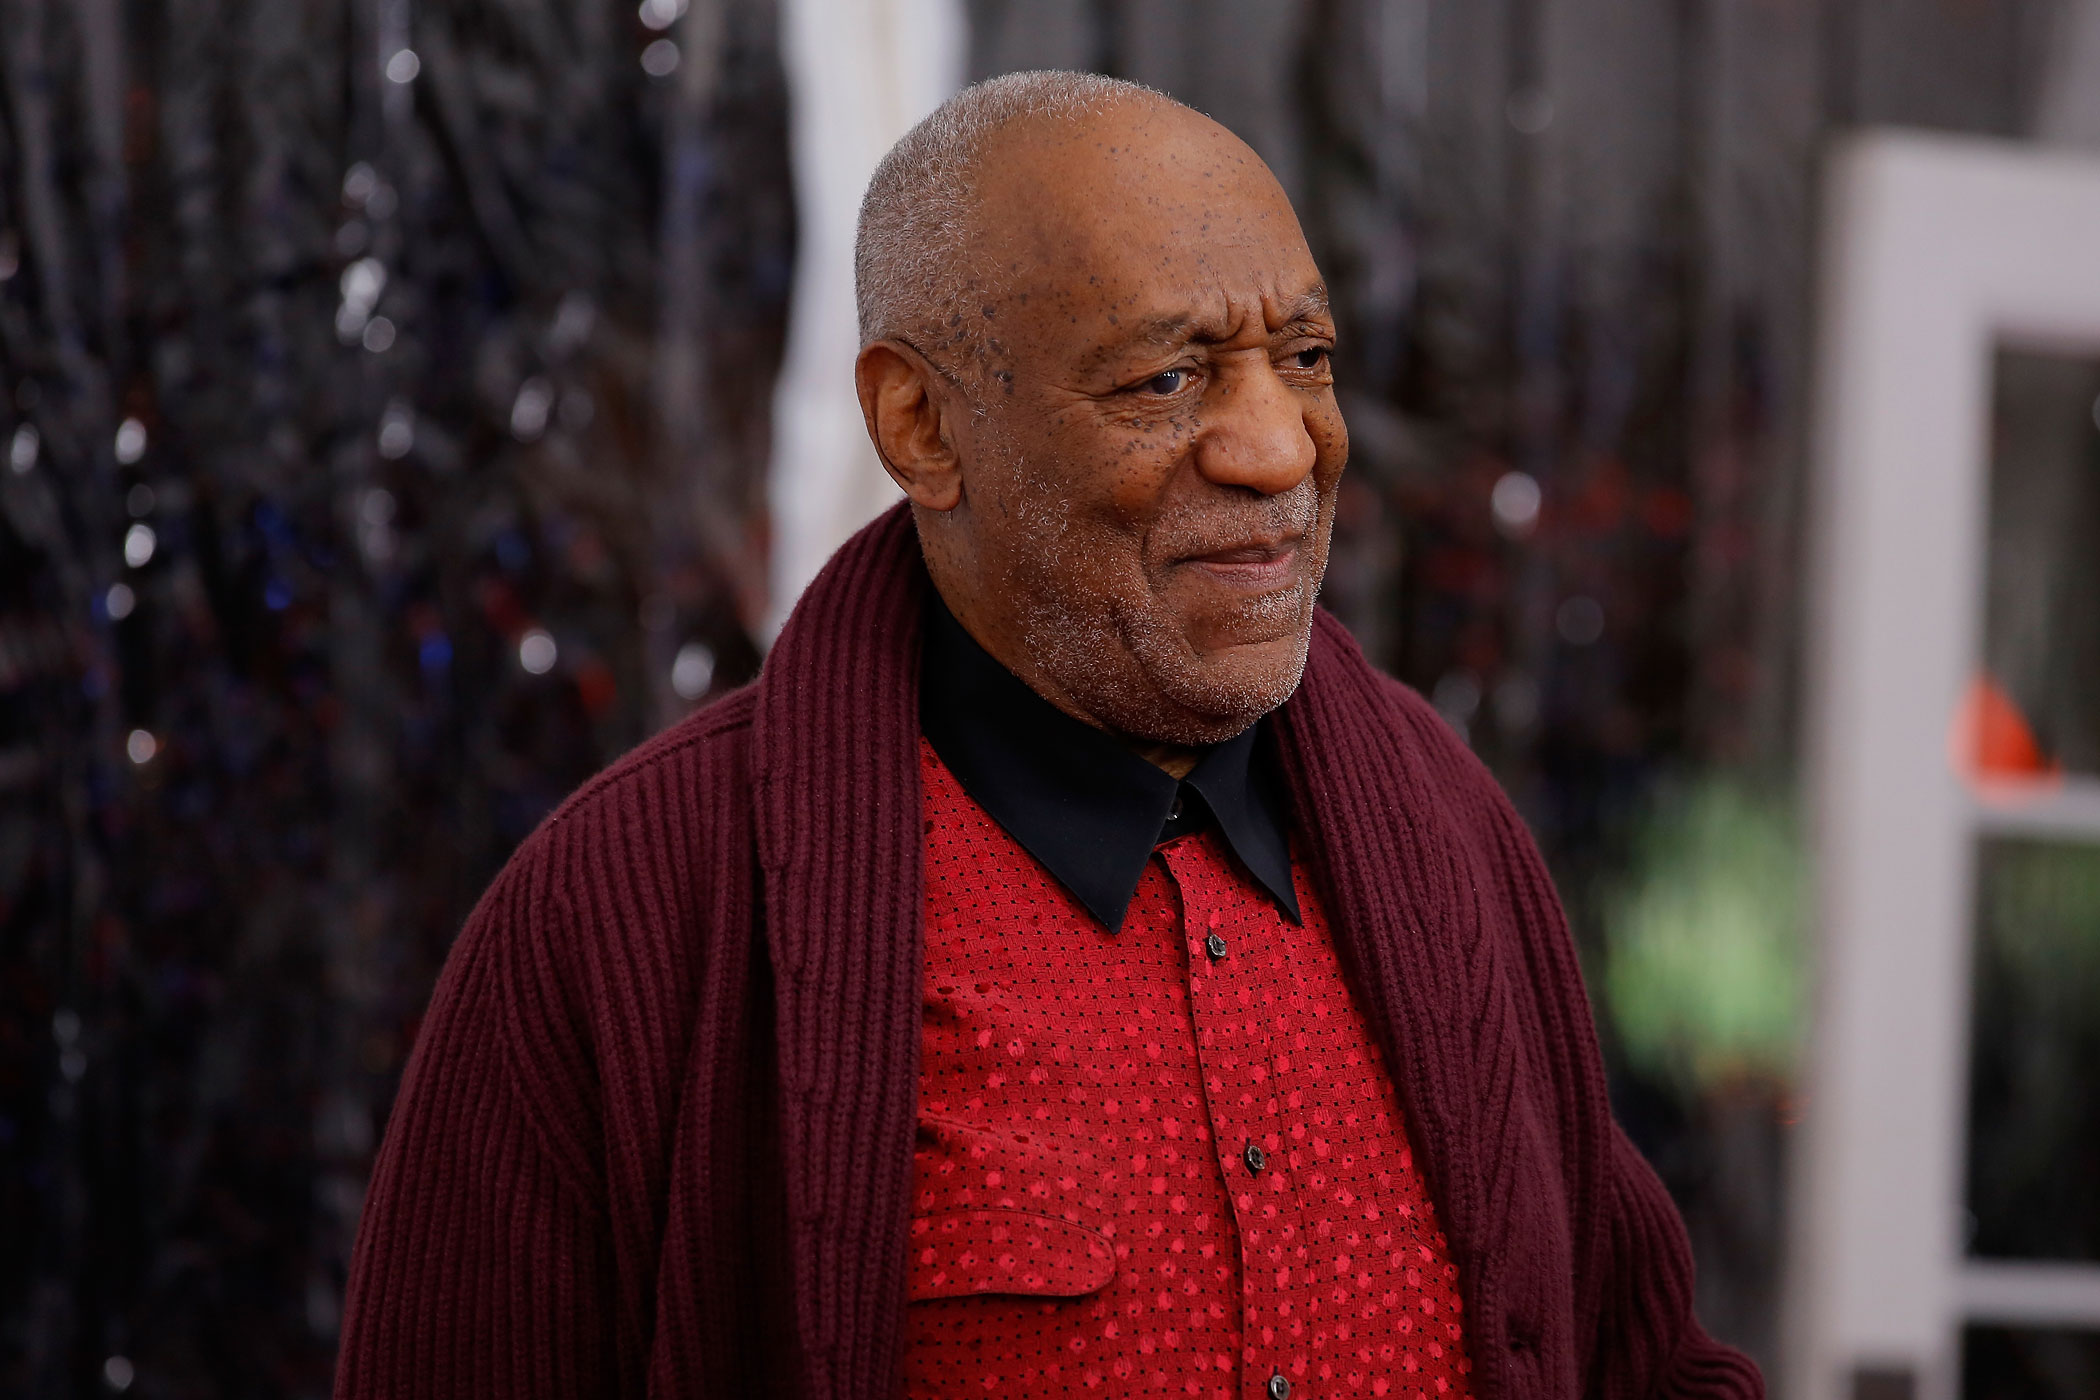 Bill Cosby attends the 7th annual Stand Up for Heroes event at Madison Square Garden in New York City on Nov. 6, 2013 (Jemal Countess—Getty Images)